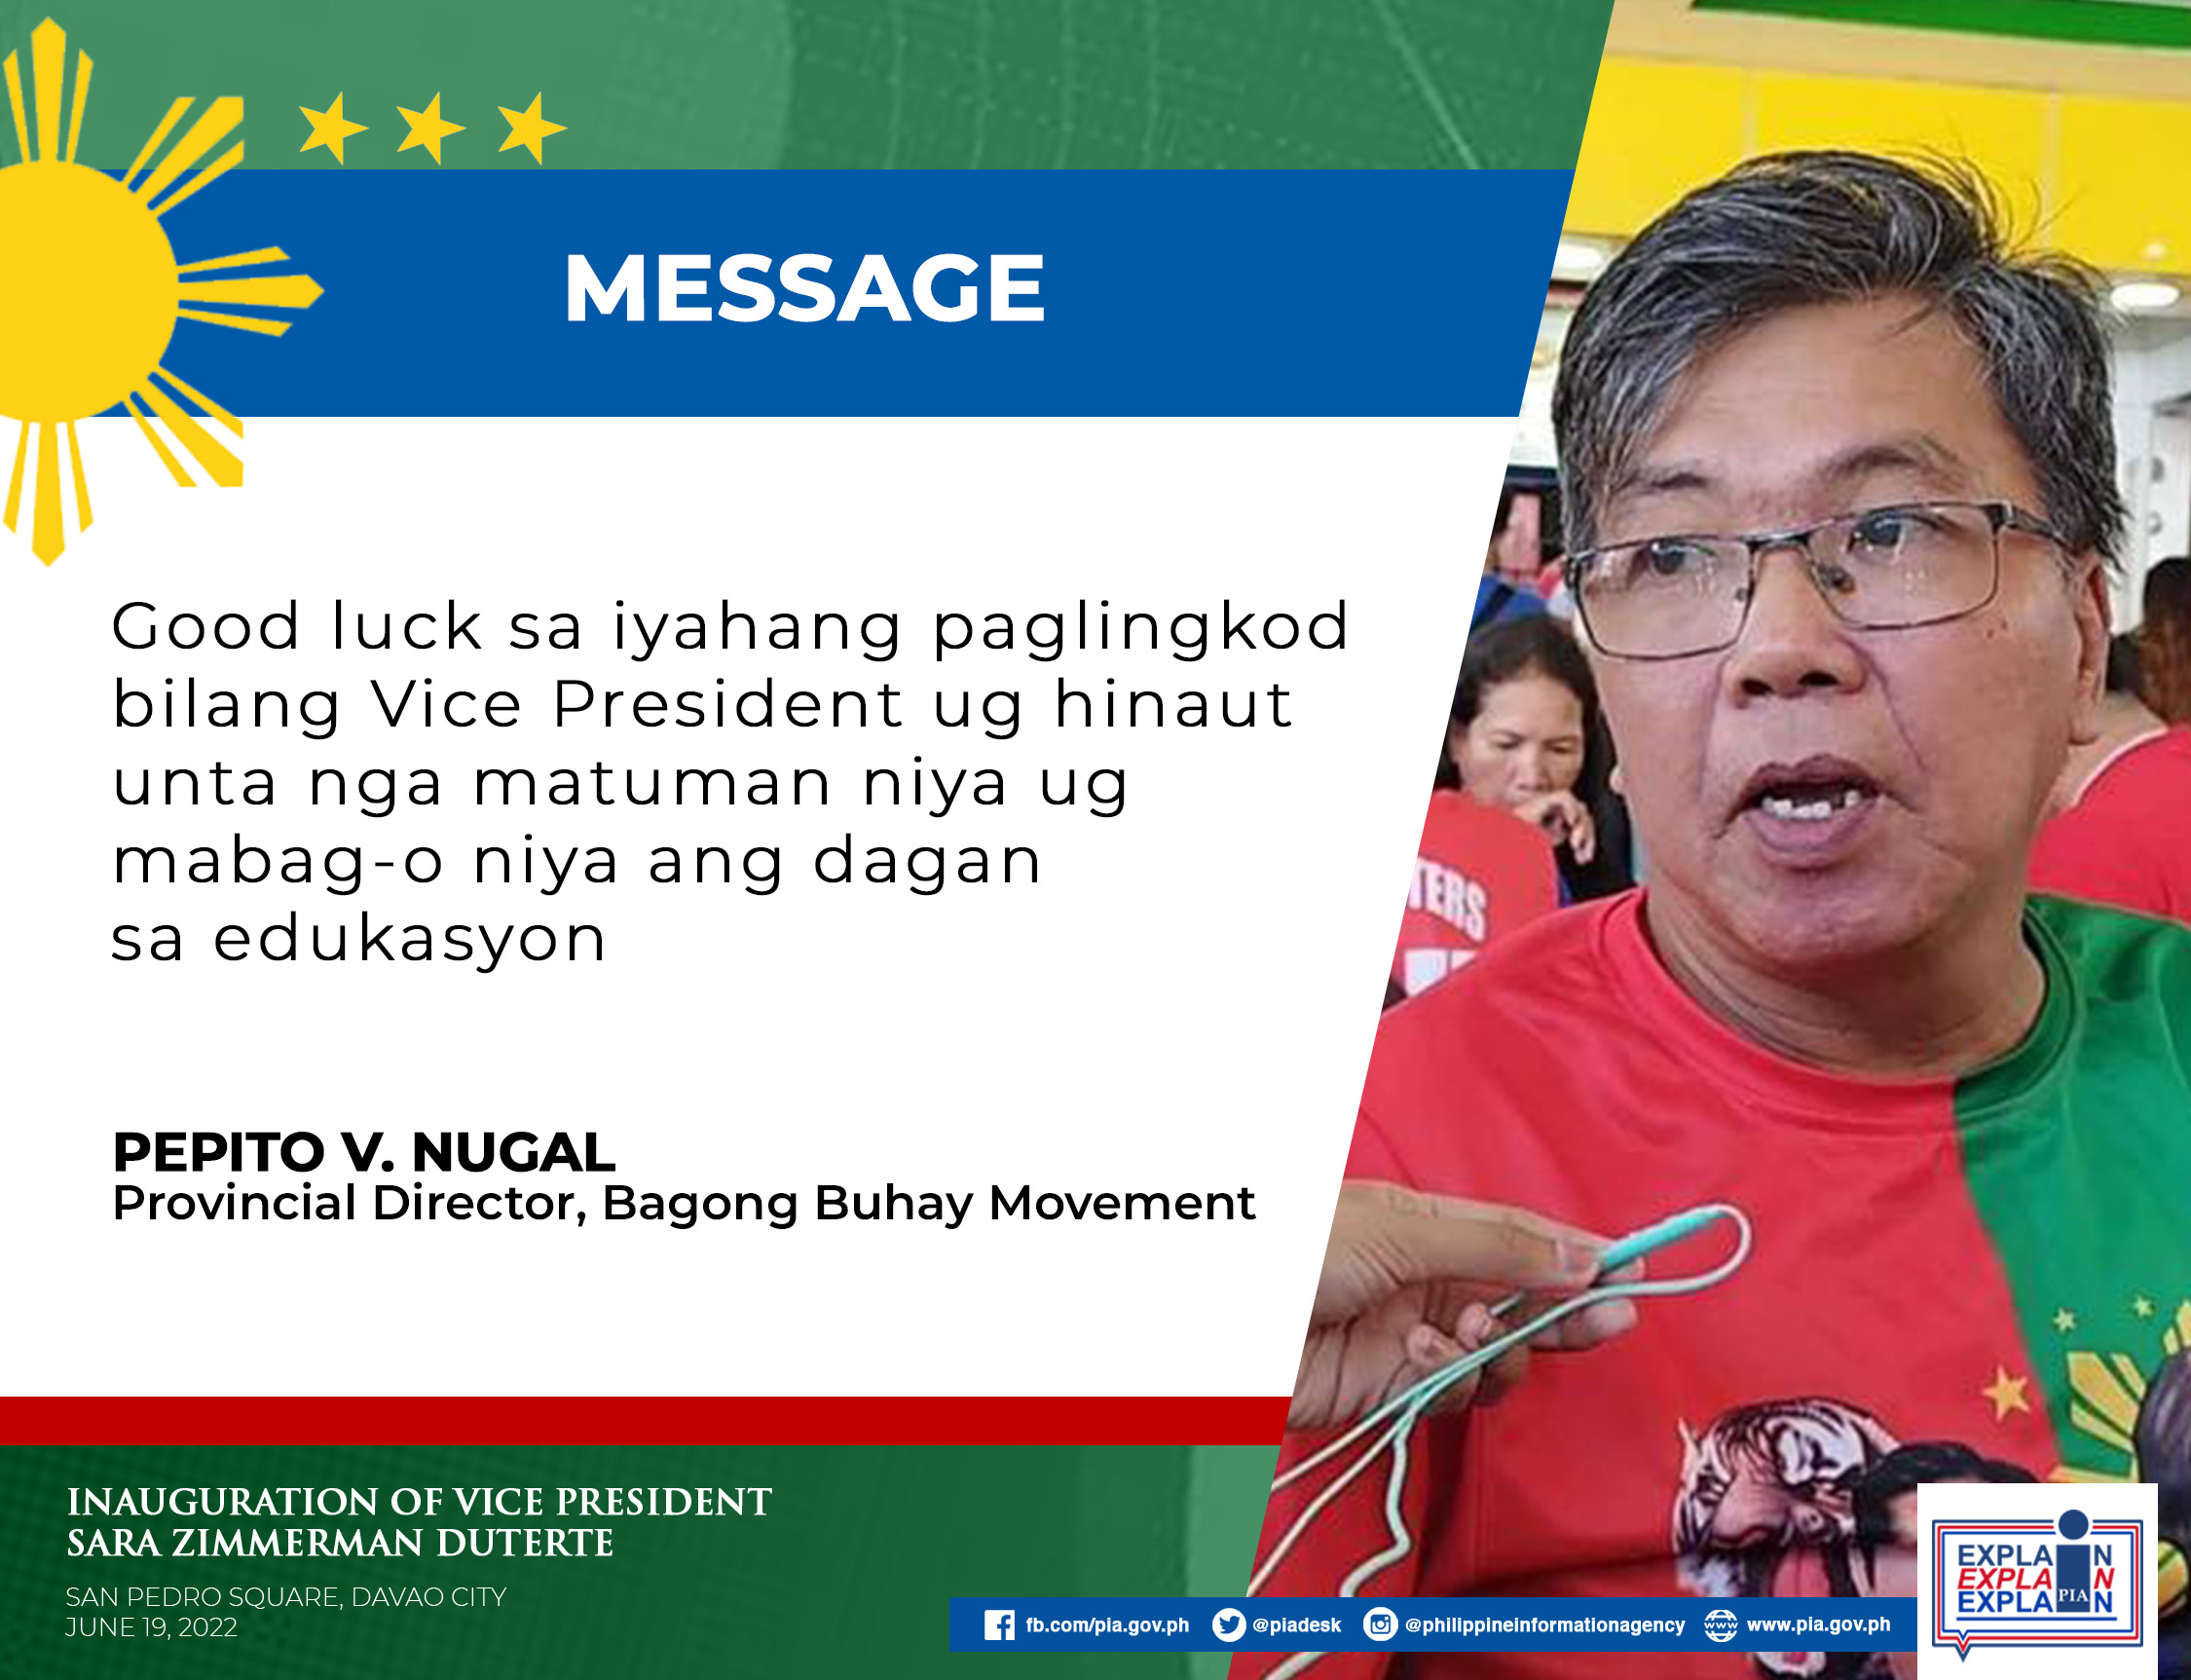 Message of Pepito V. Nugal, provincial director of Bagong Buhay Movement, on the Inauguration of Vice President elect Sara Duterte